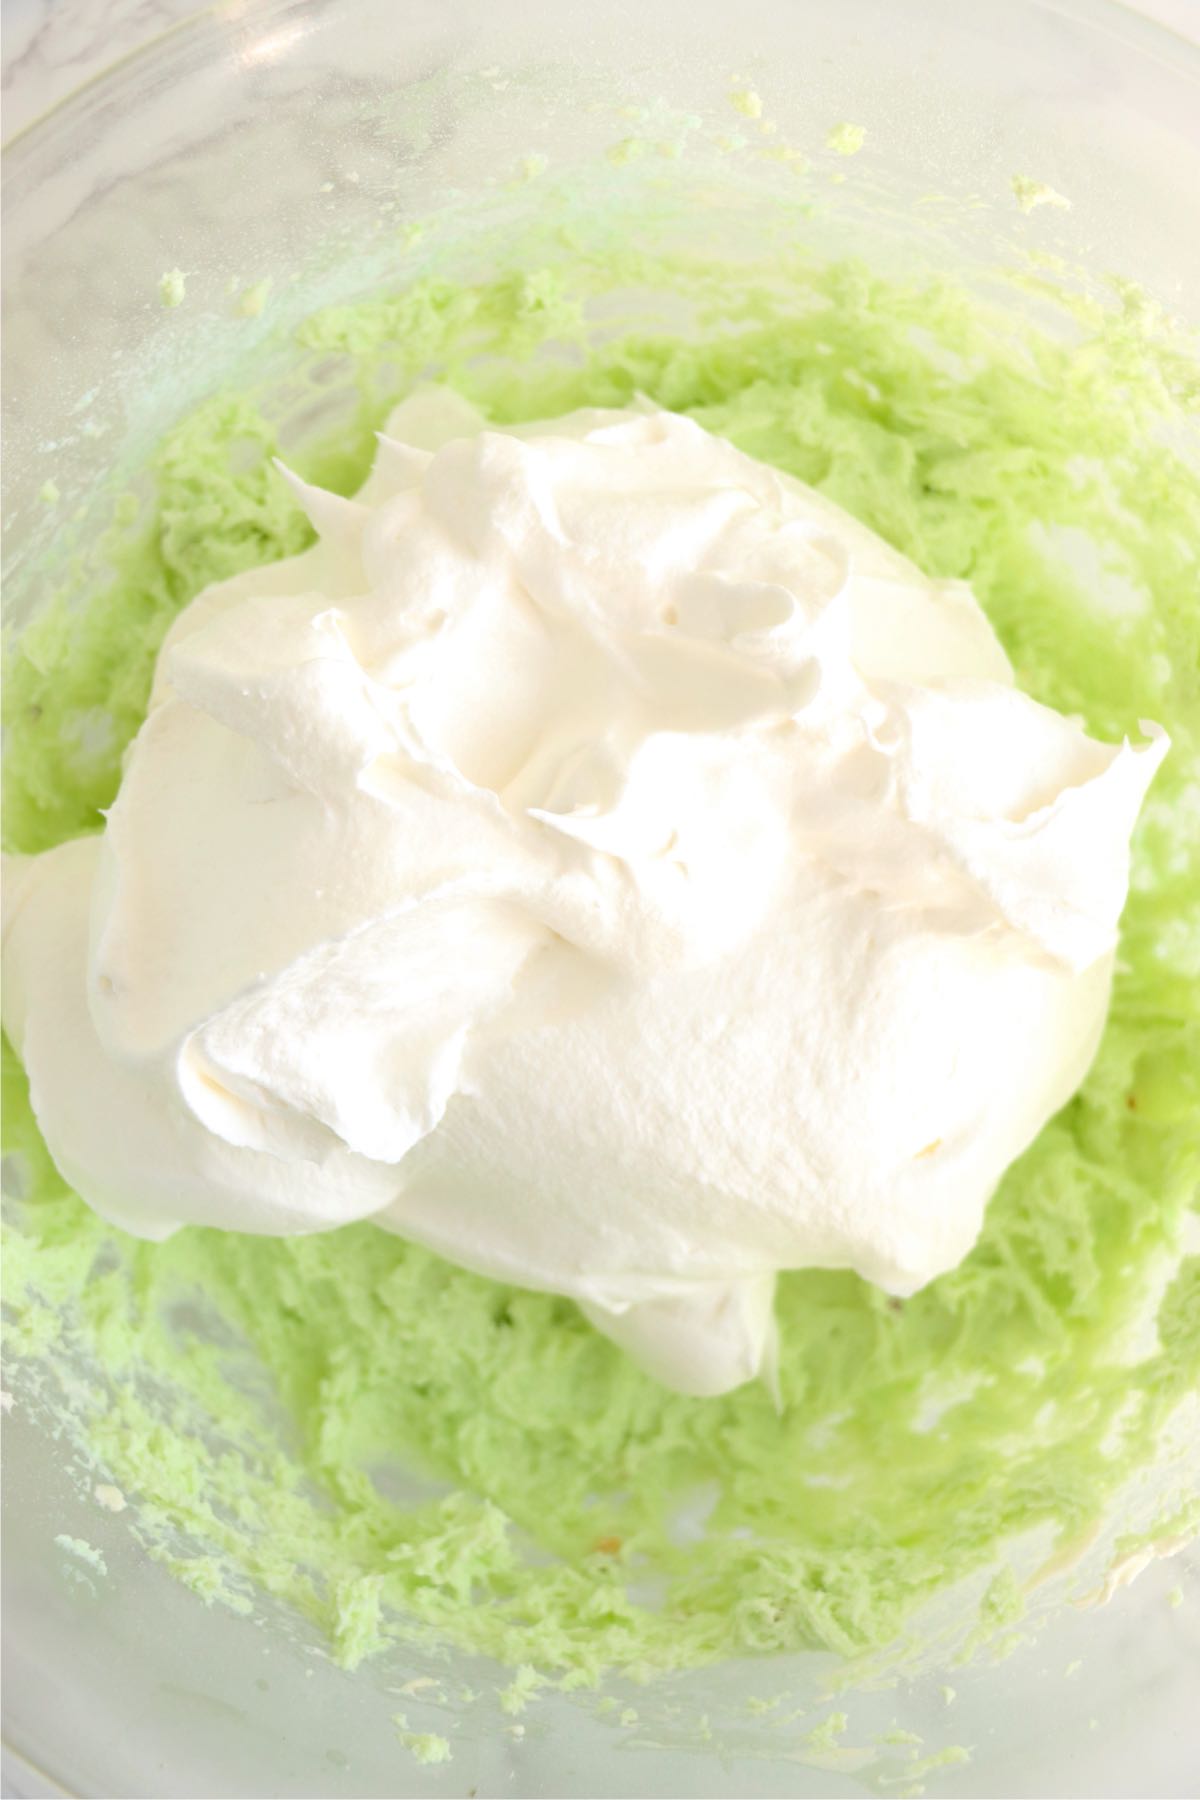 Dollop of whipped topping on top of pistachio pudding